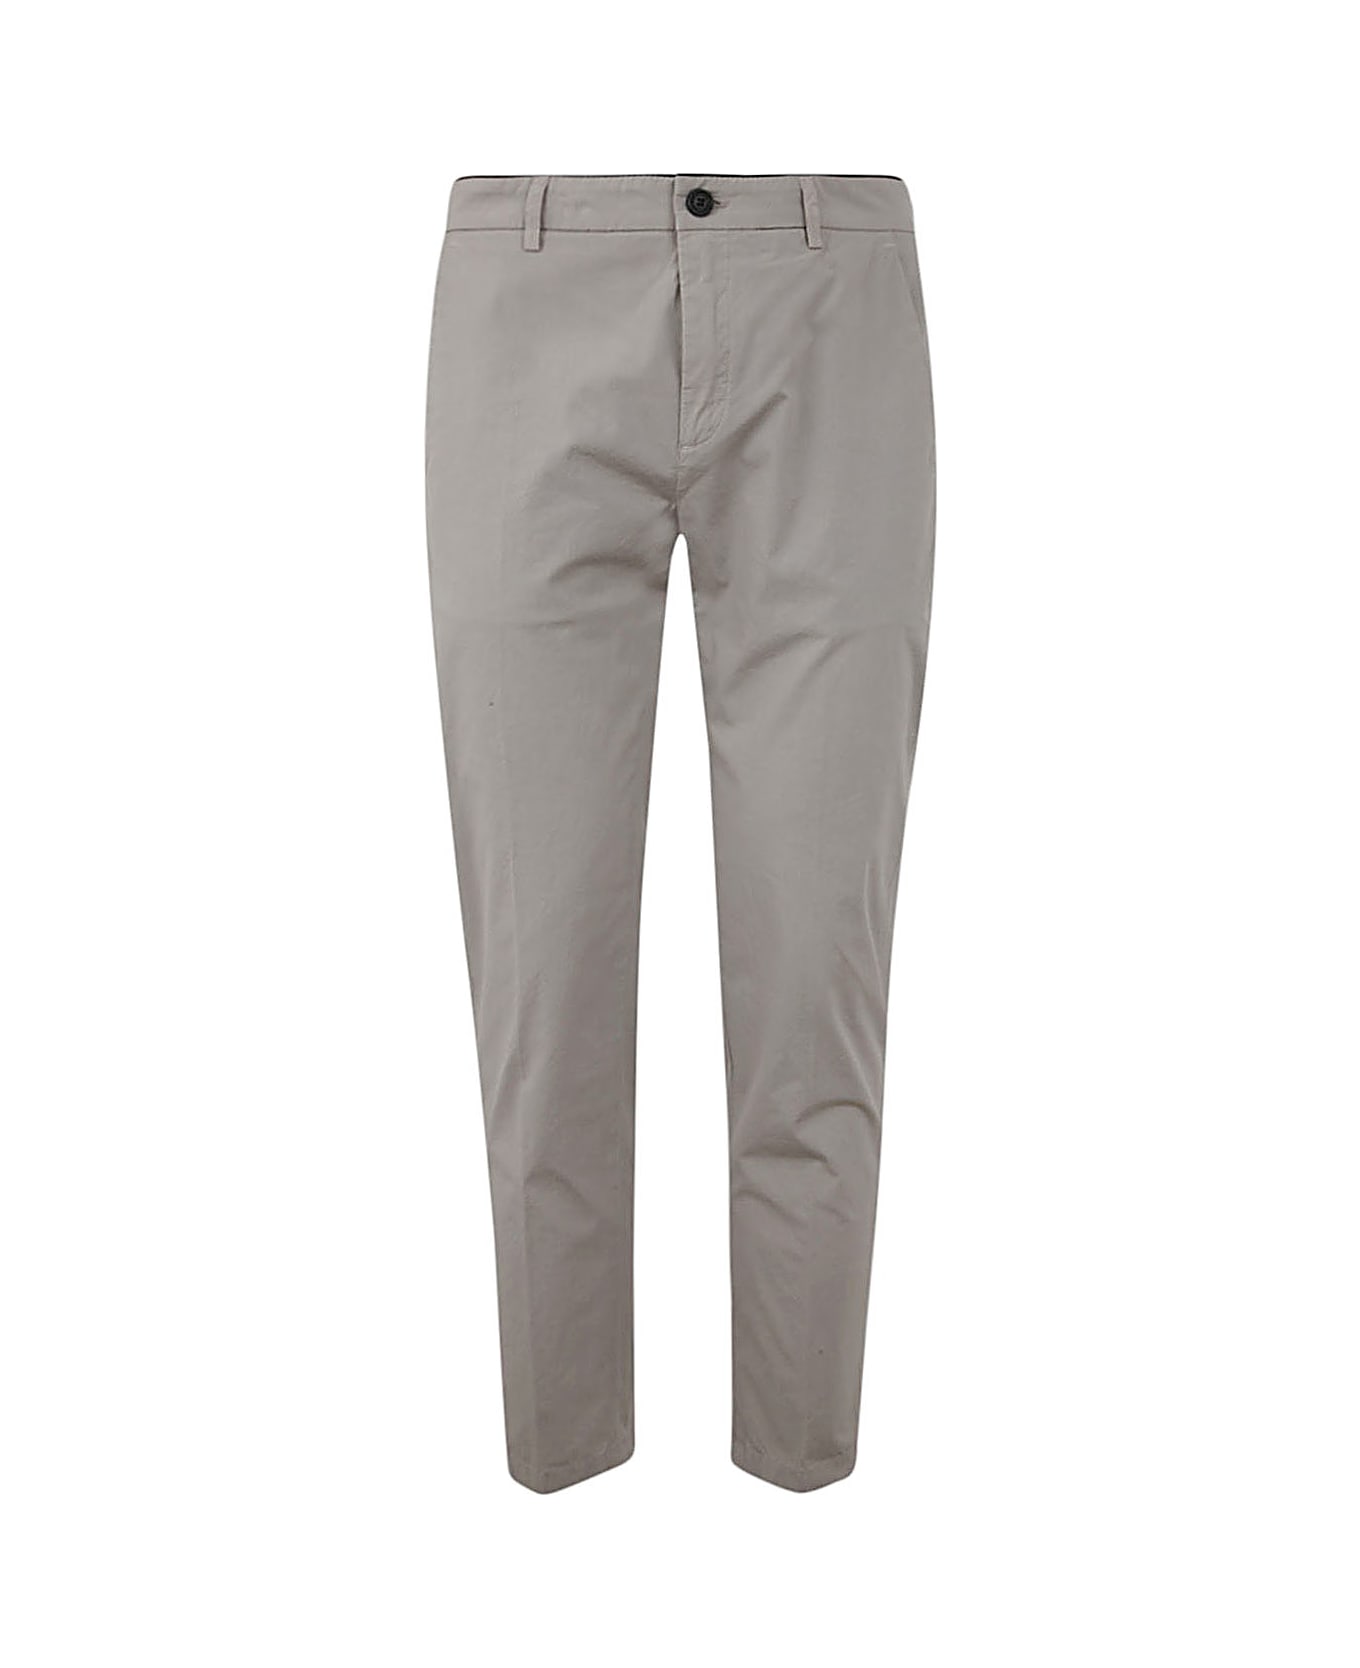 Department Five Prince Crop Chino Trousers - Stucco ボトムス